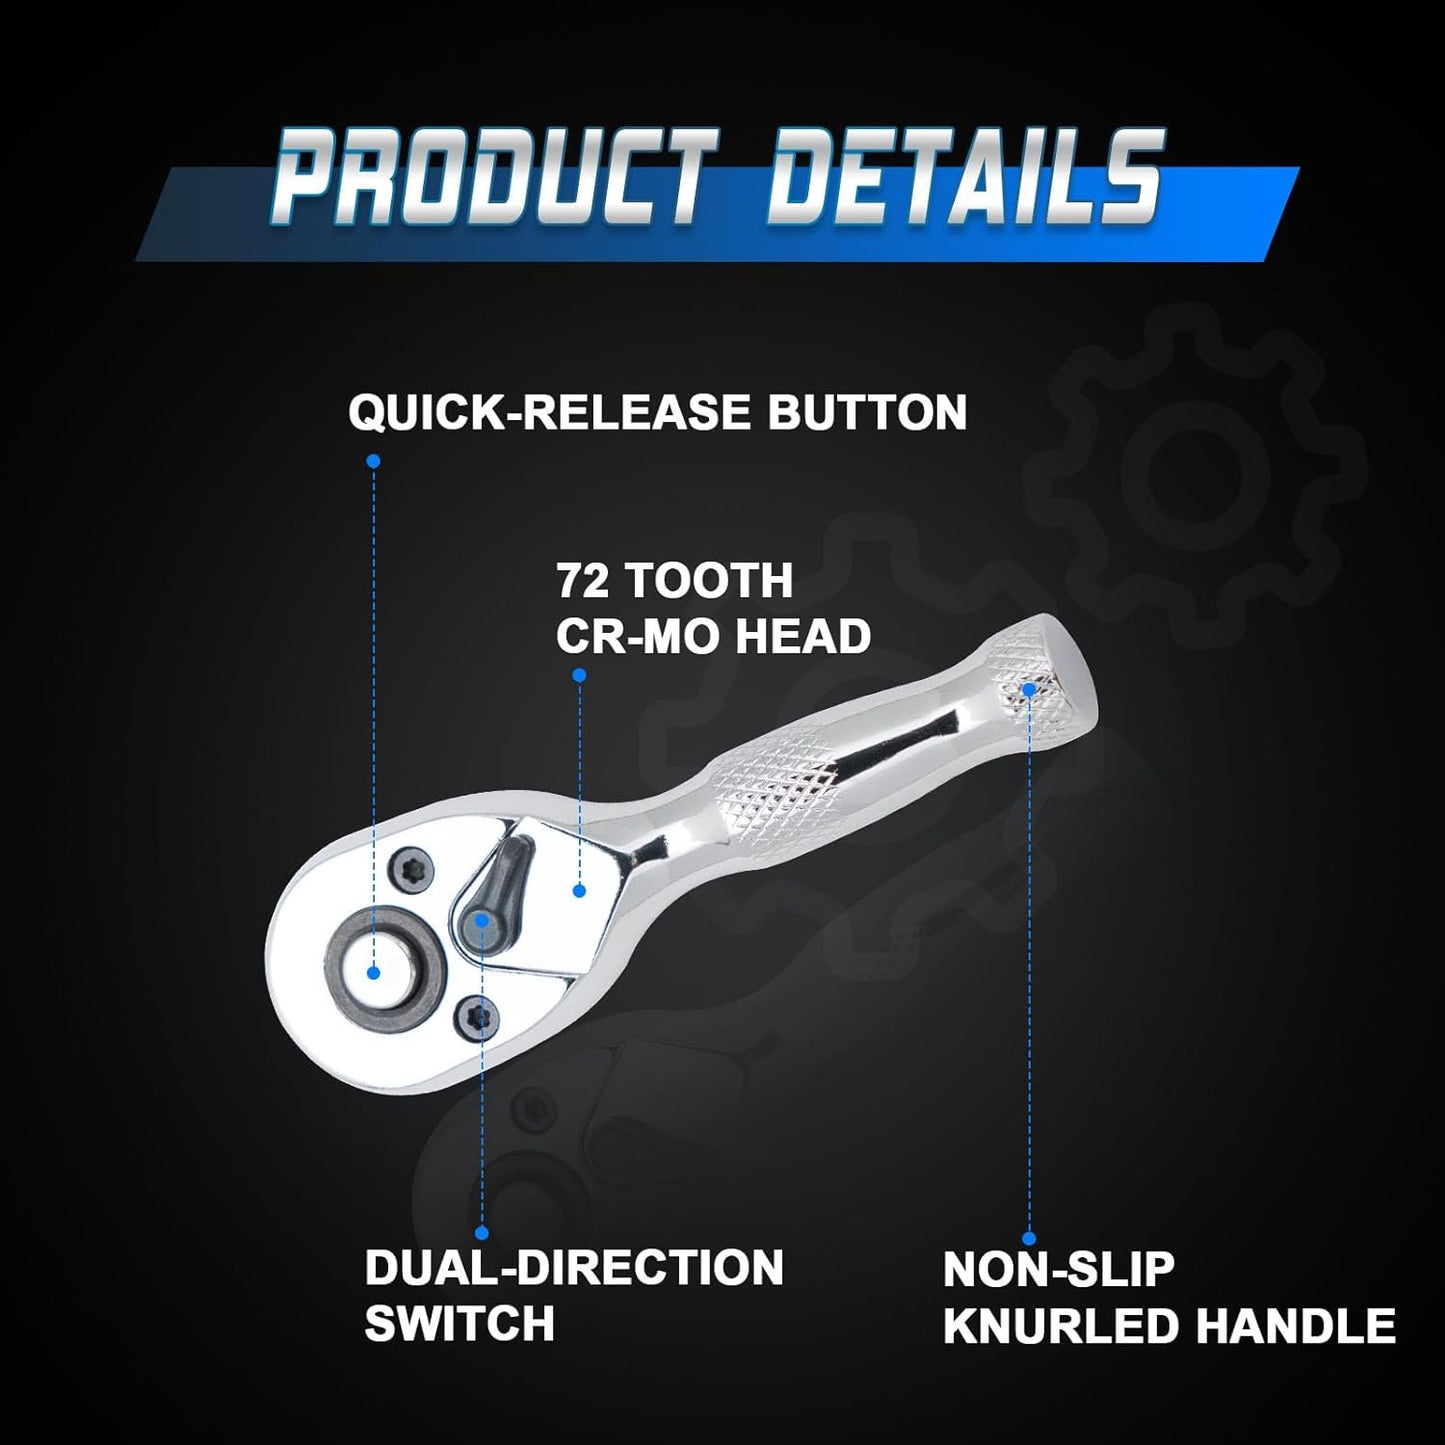 1/4 INCH QUICK RELEASE MINI RATCHET WRENCH